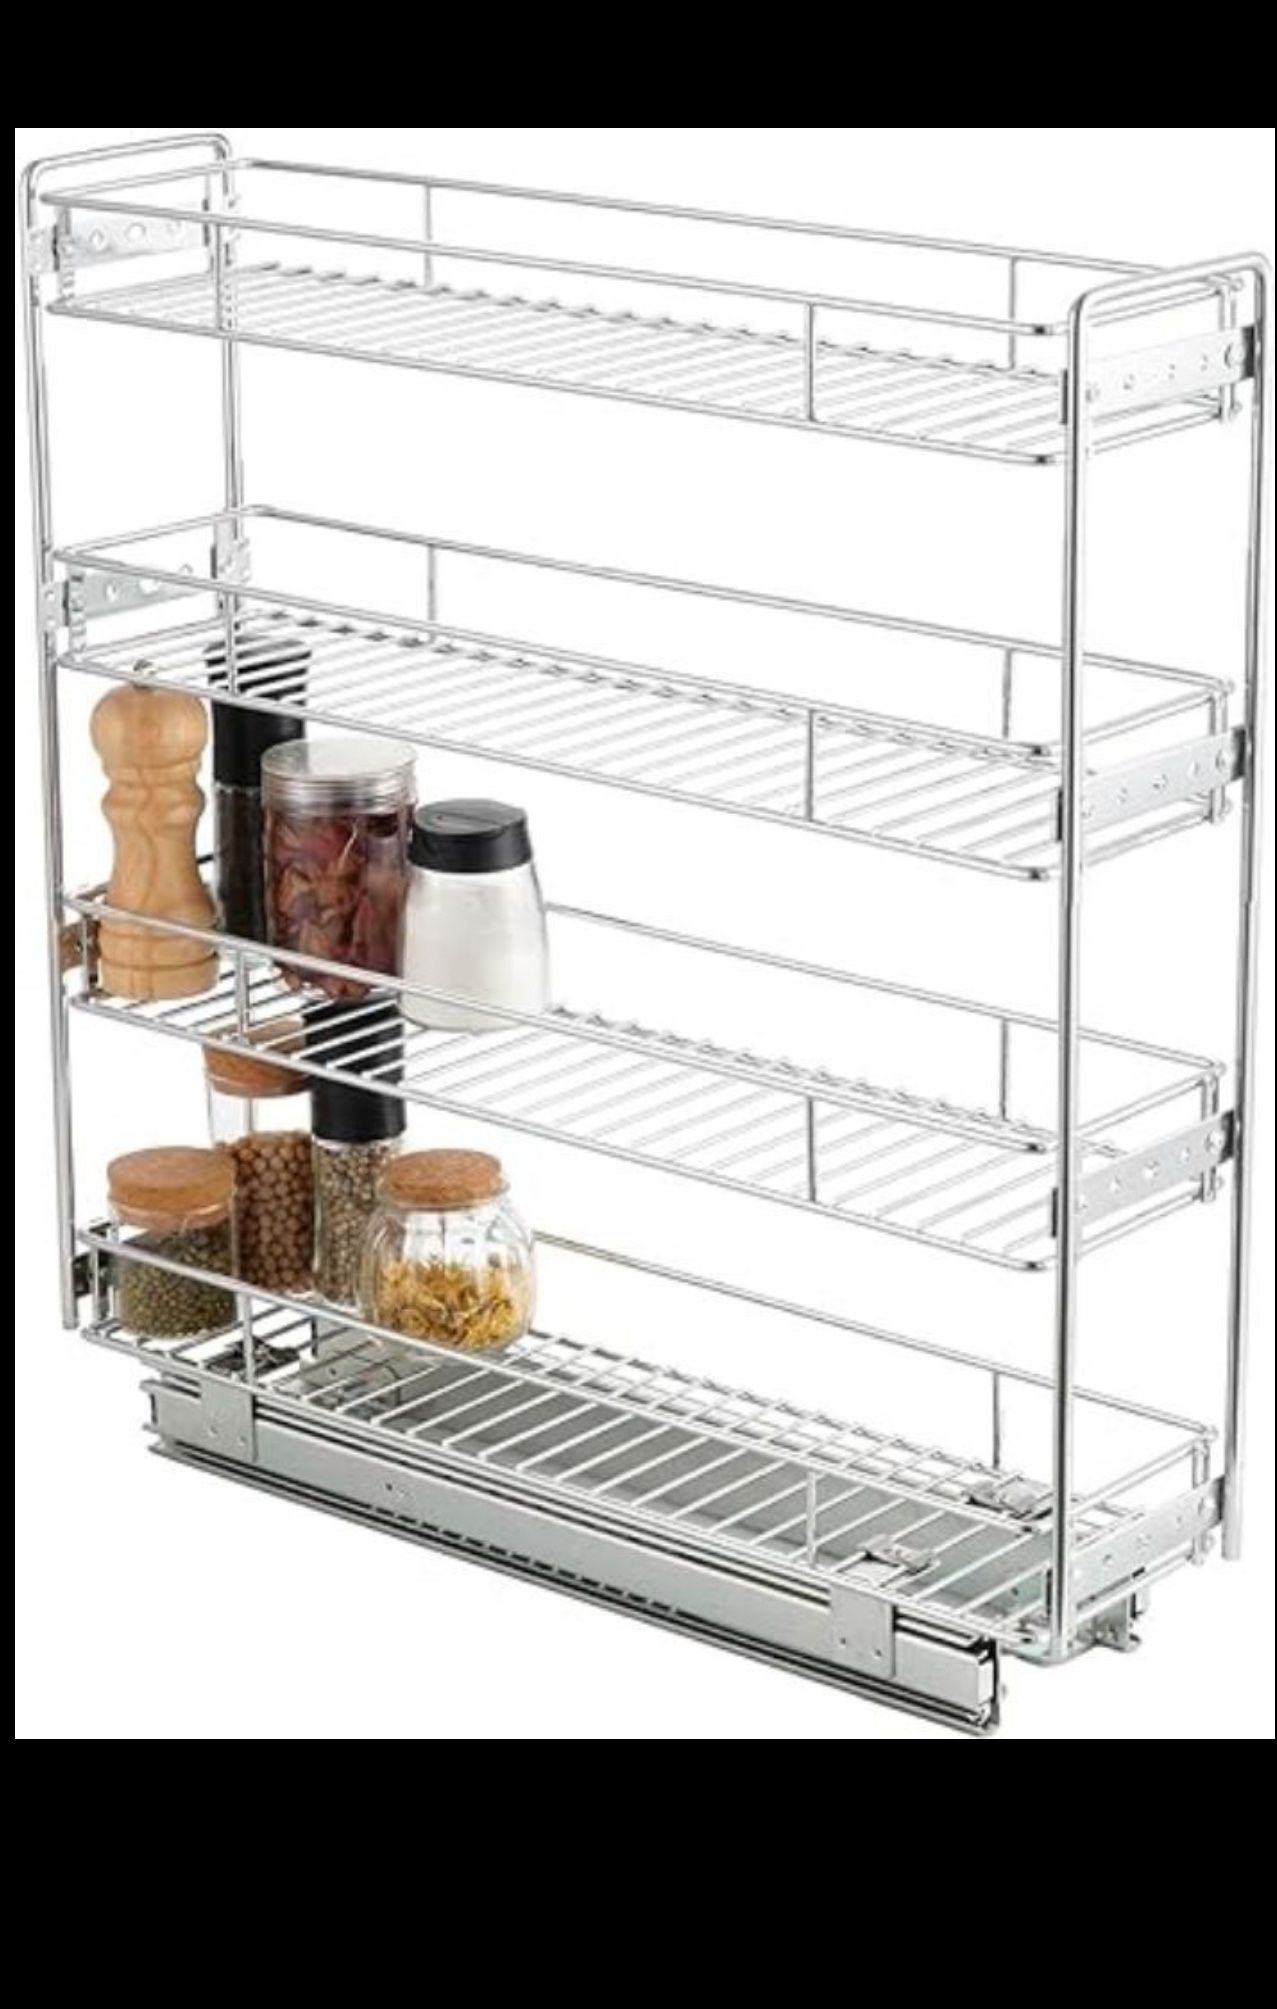 OCG 4-Tier Pull Out Kitchen Cabinet Spice Rack Holder Shelves (8" W x 21" D), Slide Out Slim Storage Wire Baskets for Storage Organization, Narrow Pul